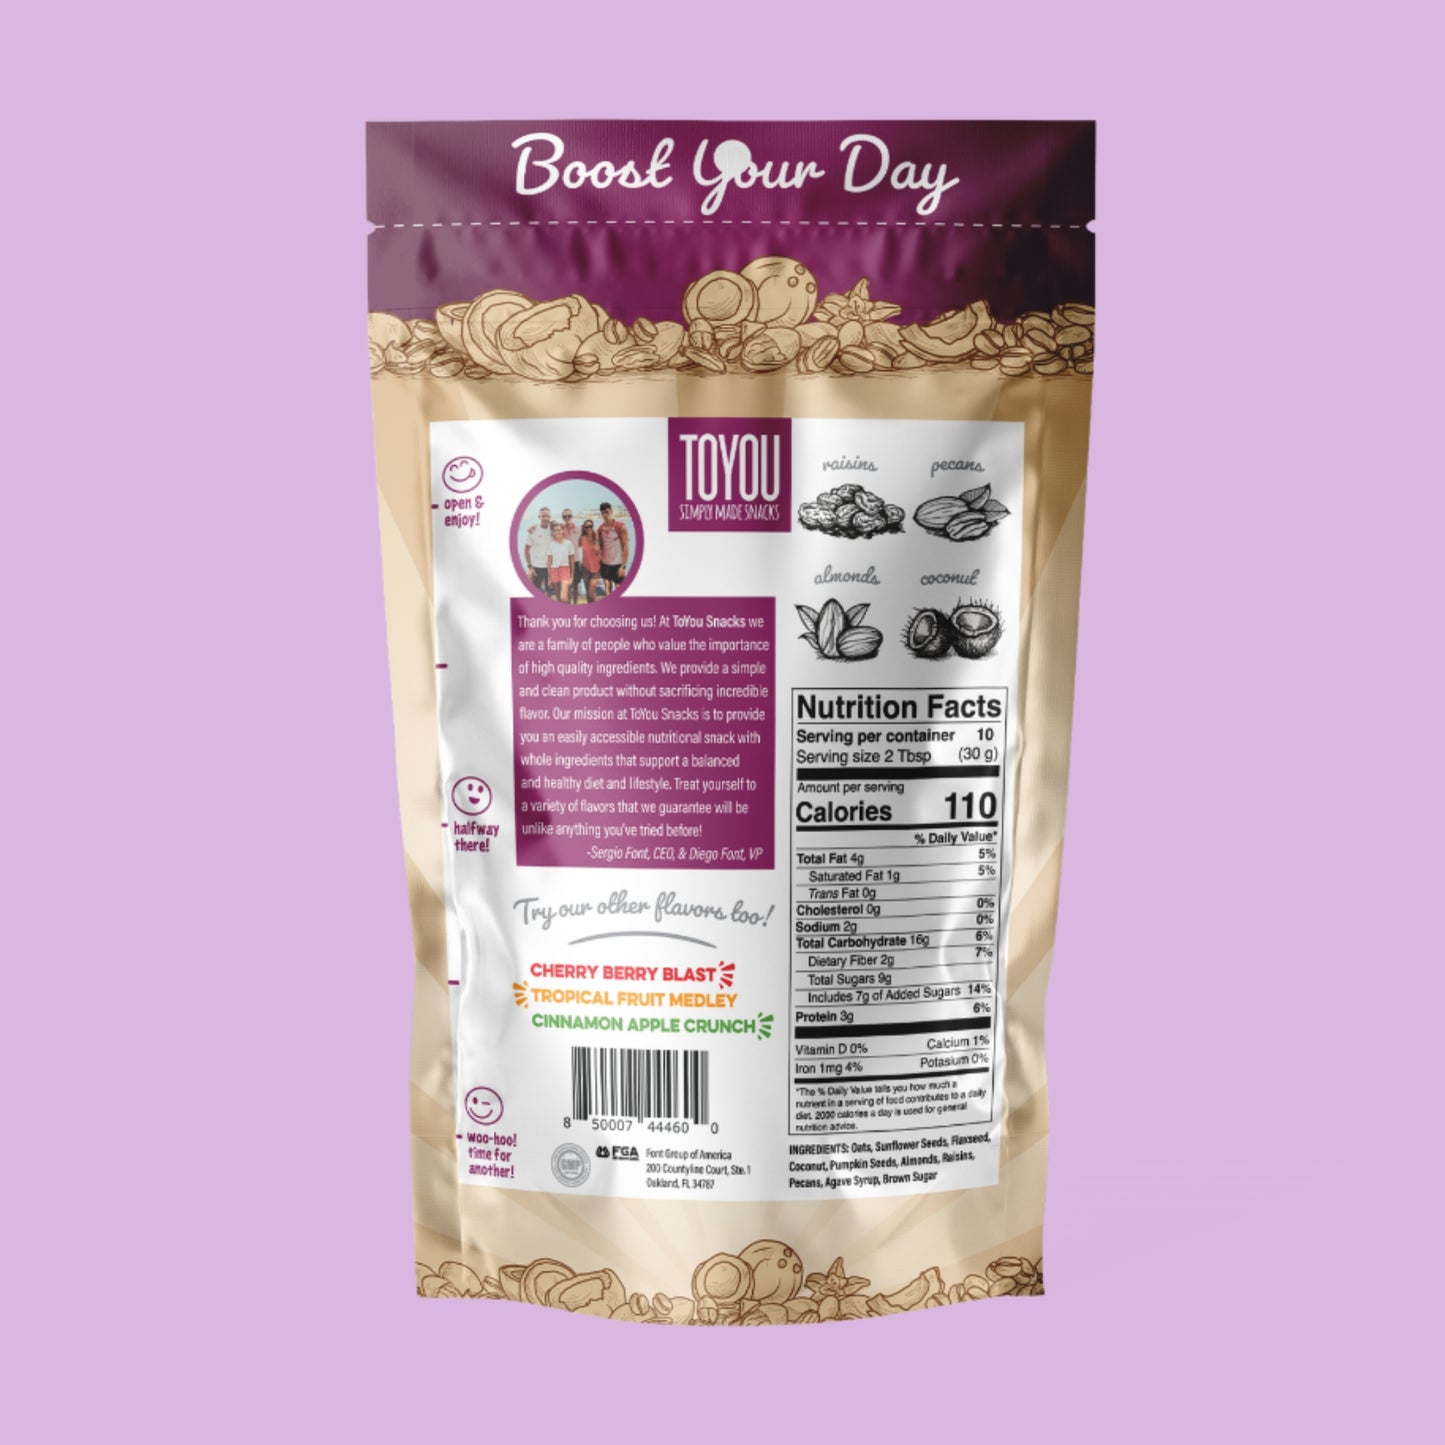 Front view: Oatmeal Raisin Crumble ToYou Granola (Nutrition facts, ingredients, brand information on pouch) on a purple background.